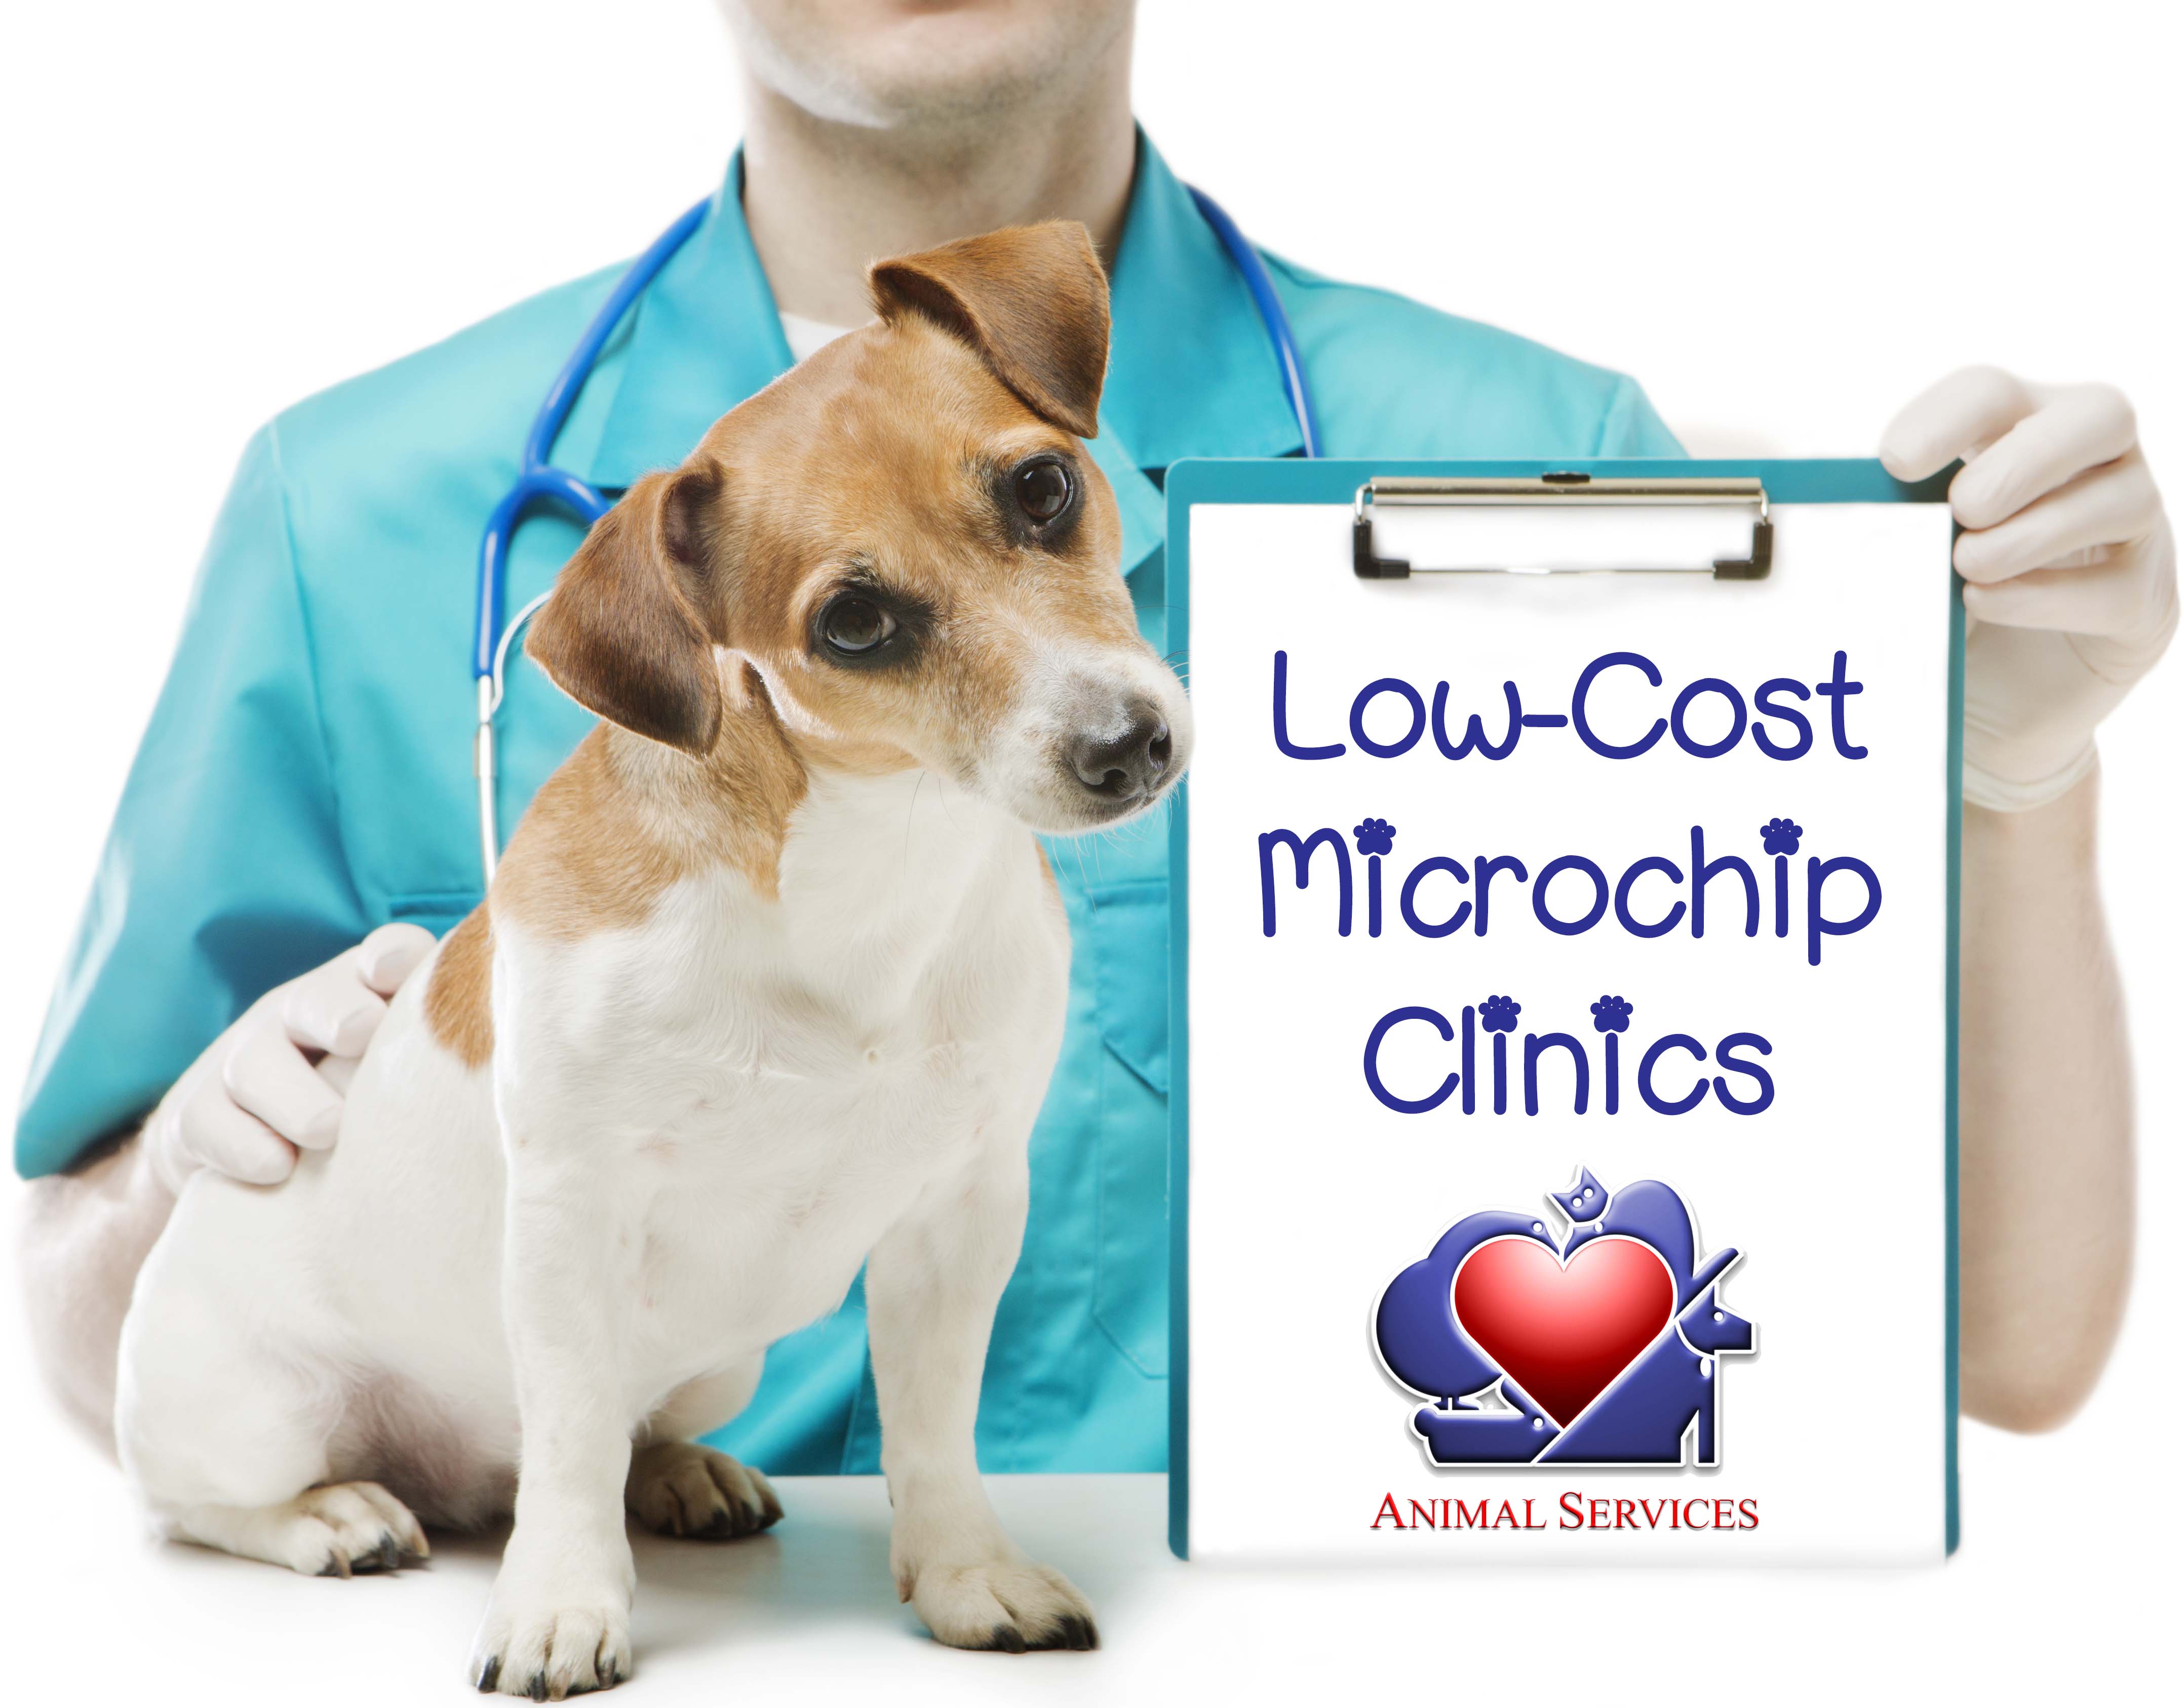 Microchip Clinics - Joint Animal Services